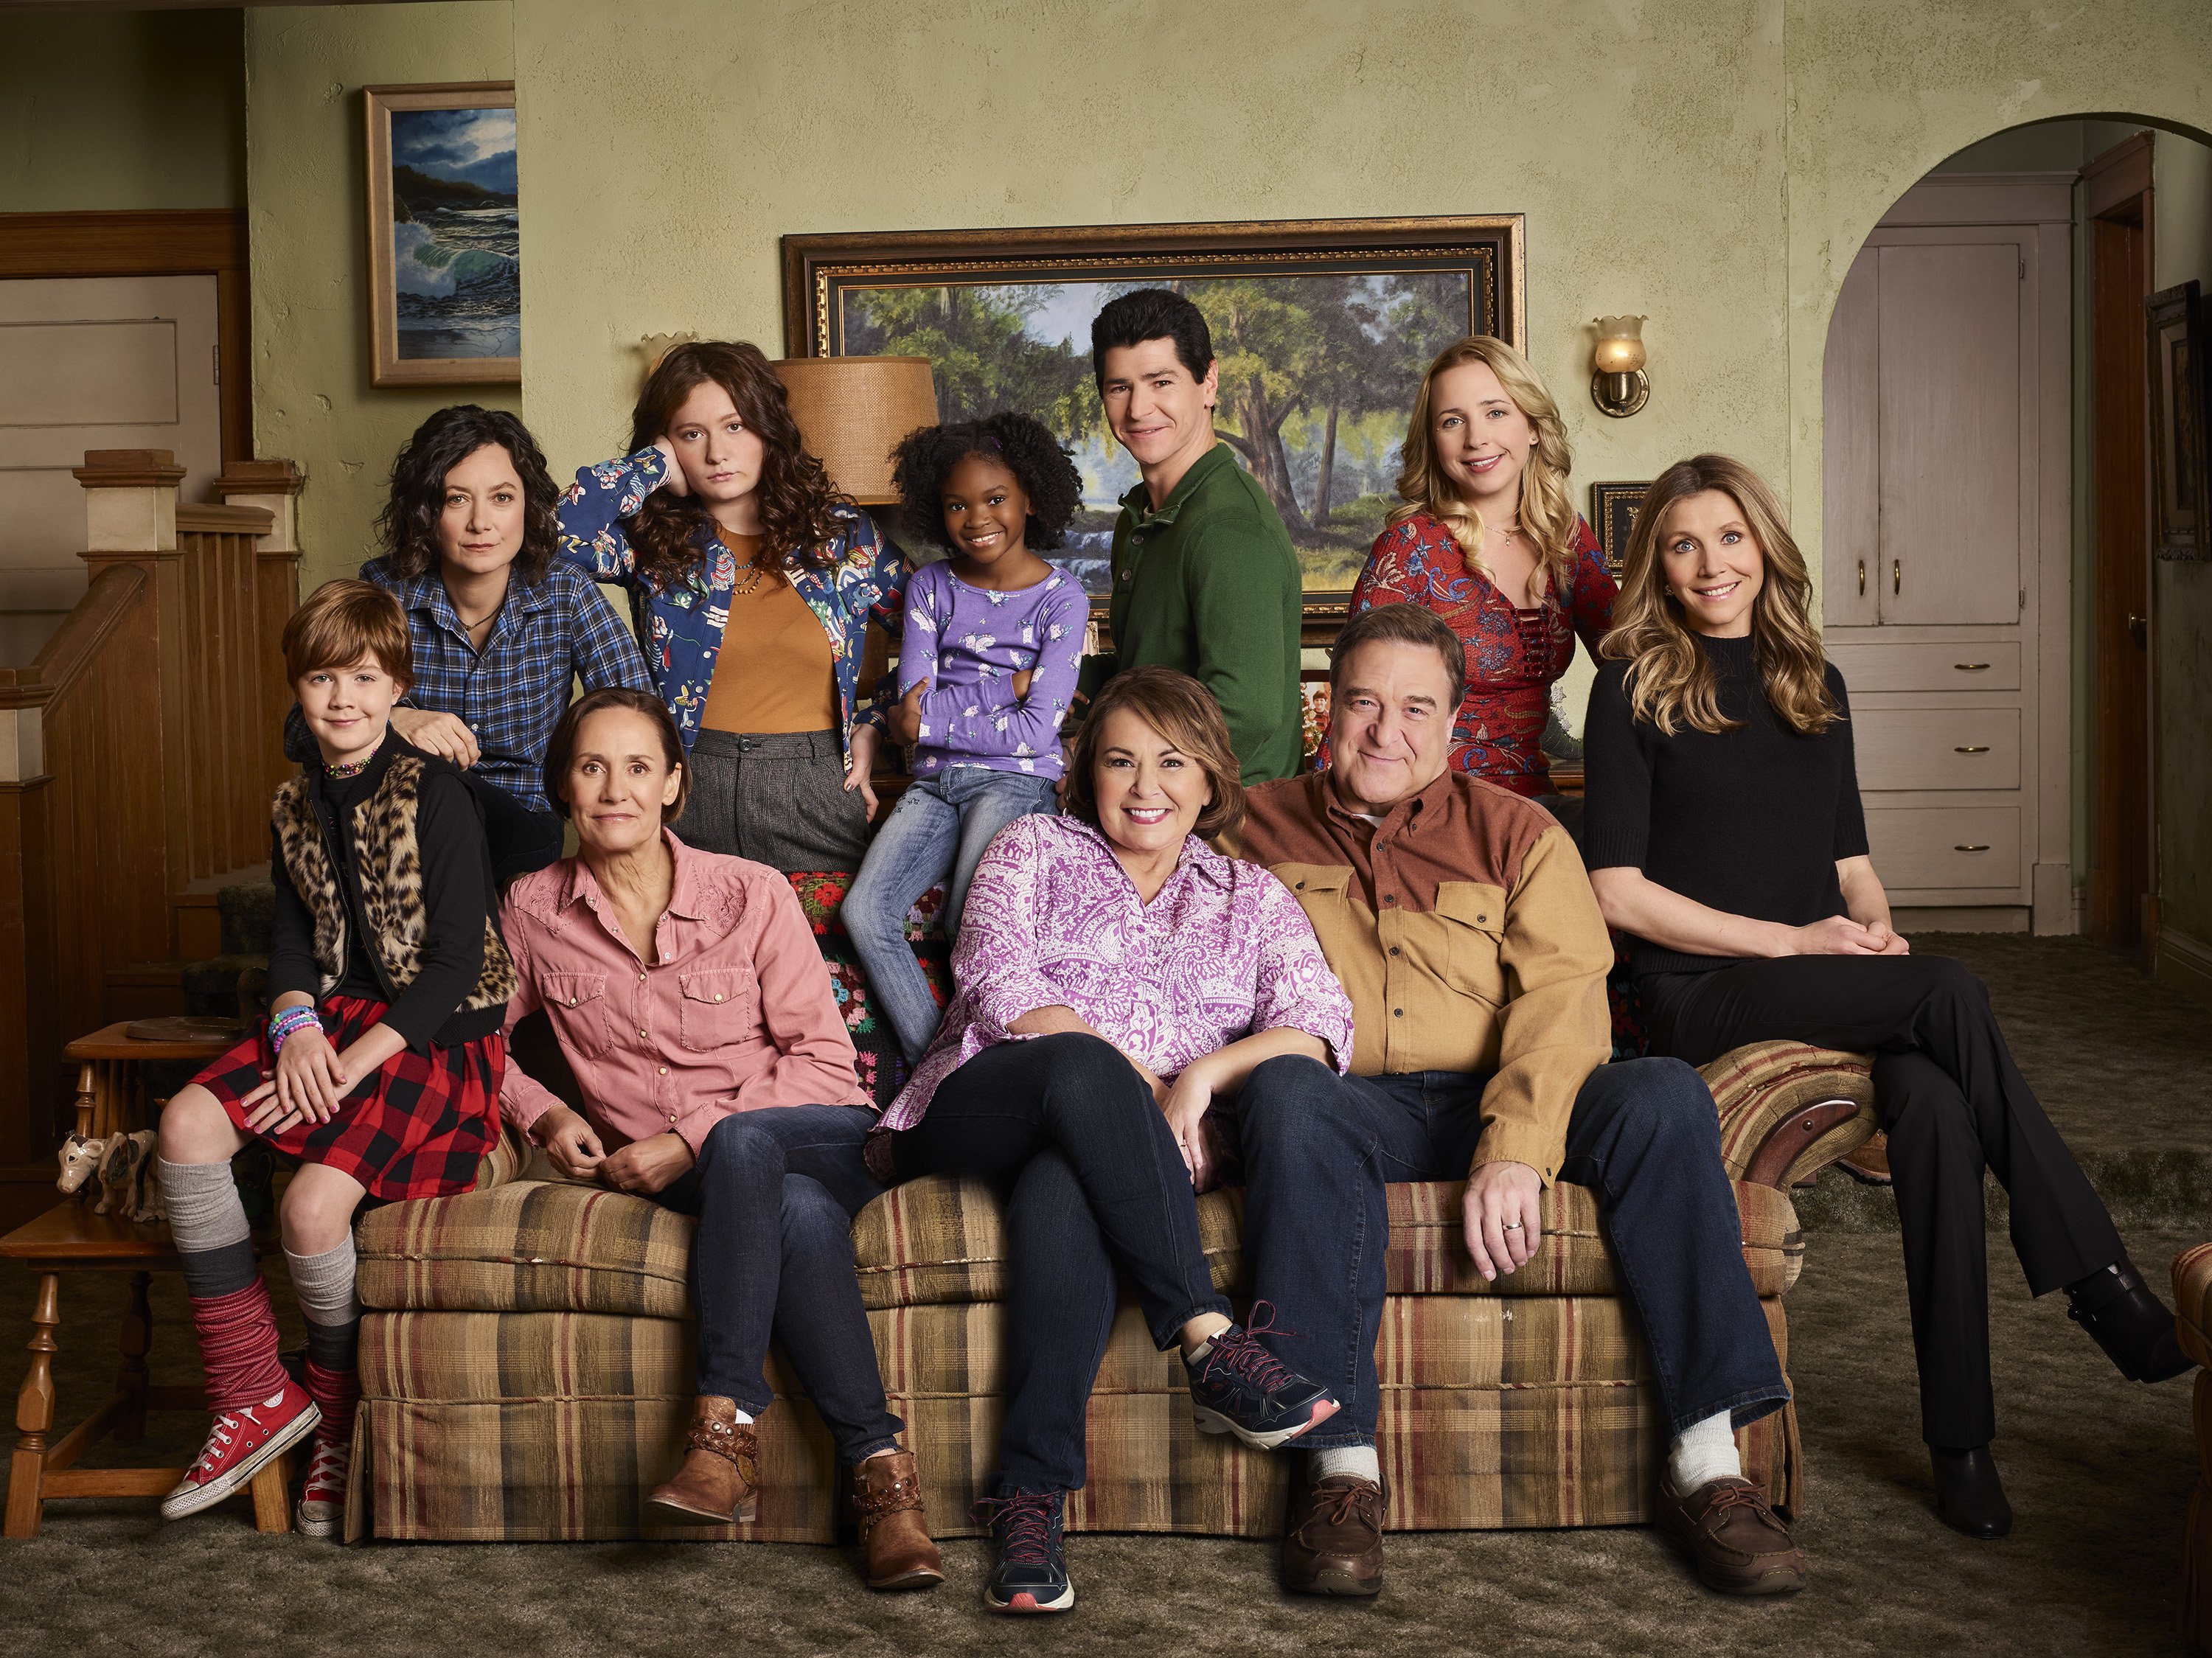 Ames McNamara as Mark, Sara Gilbert as Darlene Conner, Laurie Metcalf as Jackie Harris, Emma Kenney as Harris Conner, Jayden Rey as Mary, Roseanne Barr as Roseanne Conner, Michael Fishman as D.J. Conner, John Goodman as Dan Conner, Lecy Goranson as Becky Conner, and Sarah Chalke as Andrea on the "Roseanne" reboot in 2017 | Source: Getty Images 